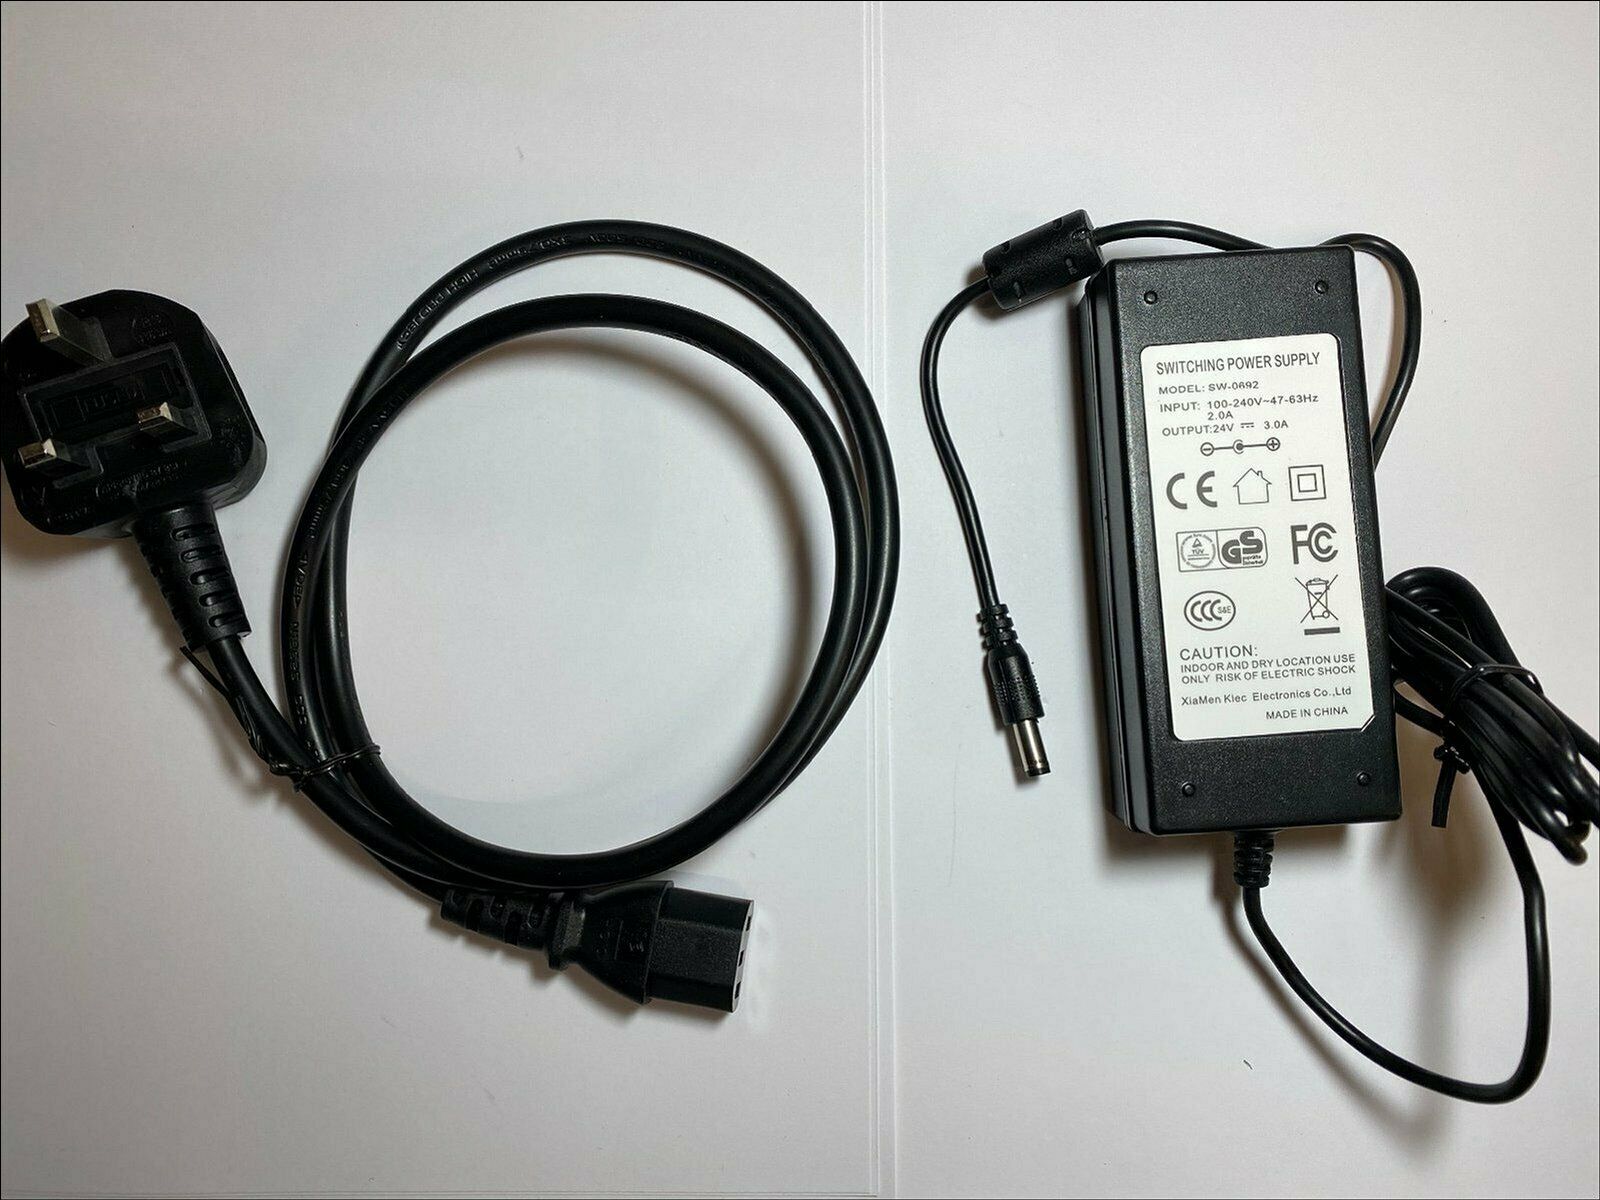 Replacement for 26V 2.3A AC-DC Adaptor Power Supply 4 Tunturi E80 Exercise Bike Voltage: 24V Output Current: 3A Bu